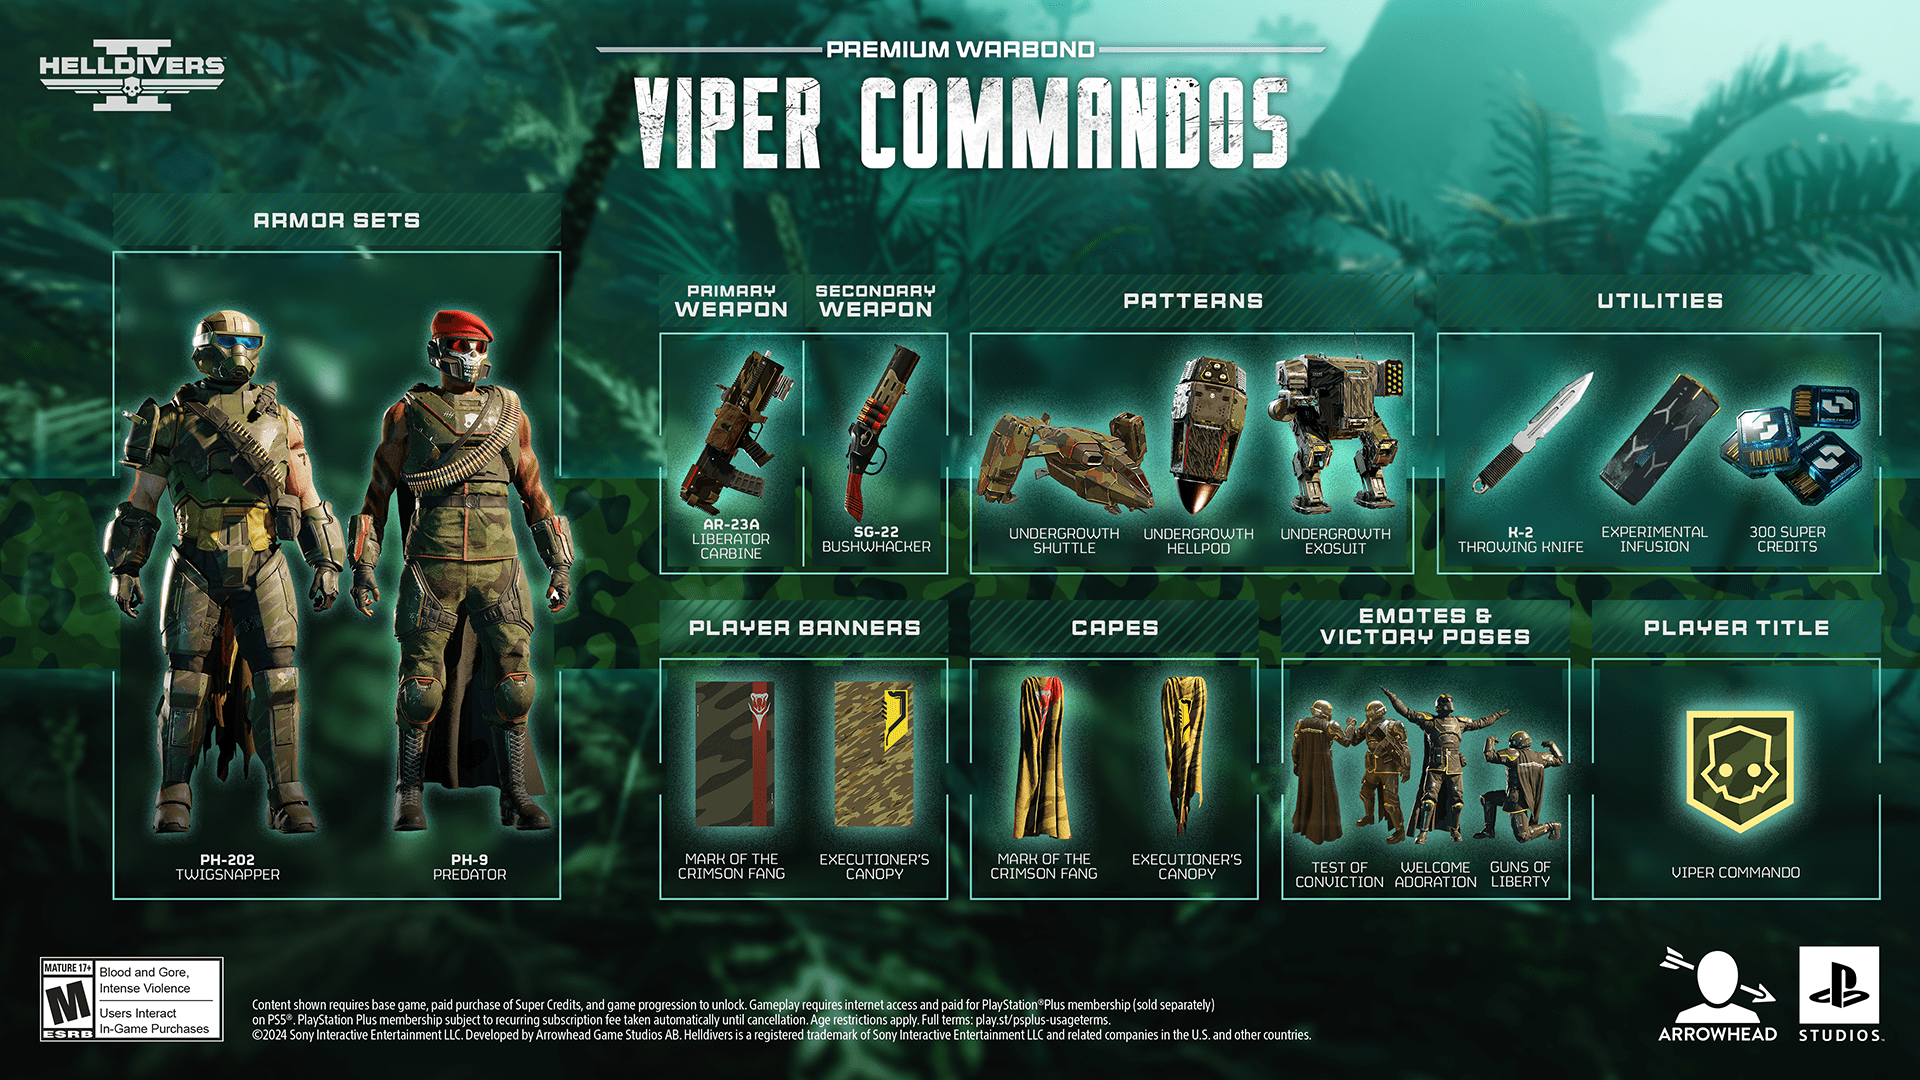 Cette image montre ce que contient le Viper Commandos Premium Warbond :

Armor Sets

PH-202
TWIGSNAPPER
PH-9
PREADATOR

Weapons

Primary: AR-23A
CARABINE
secondary: SG-22
BUSHWACKER

Patterns

Viper Shuttle
Viper Hellpod
Viper Combat Walker

Utilities

K-2 THROWING KNIFE
EXPERIMENTAL INFUSION
300 SUPER CREDITS

Player Banners 

MARK OF THE CRIMSON FANG
EXECUTIONERS CANOPY

Capes

MARK OF THE CRIMSON FANG
EXECUTIONERS CANOPY

Emotes Victory Poses 

TEST OF CONVICTION 
WELCOME ADORATION
GUNS OF LIBERTY

Player Title

VIPER COMMANDO